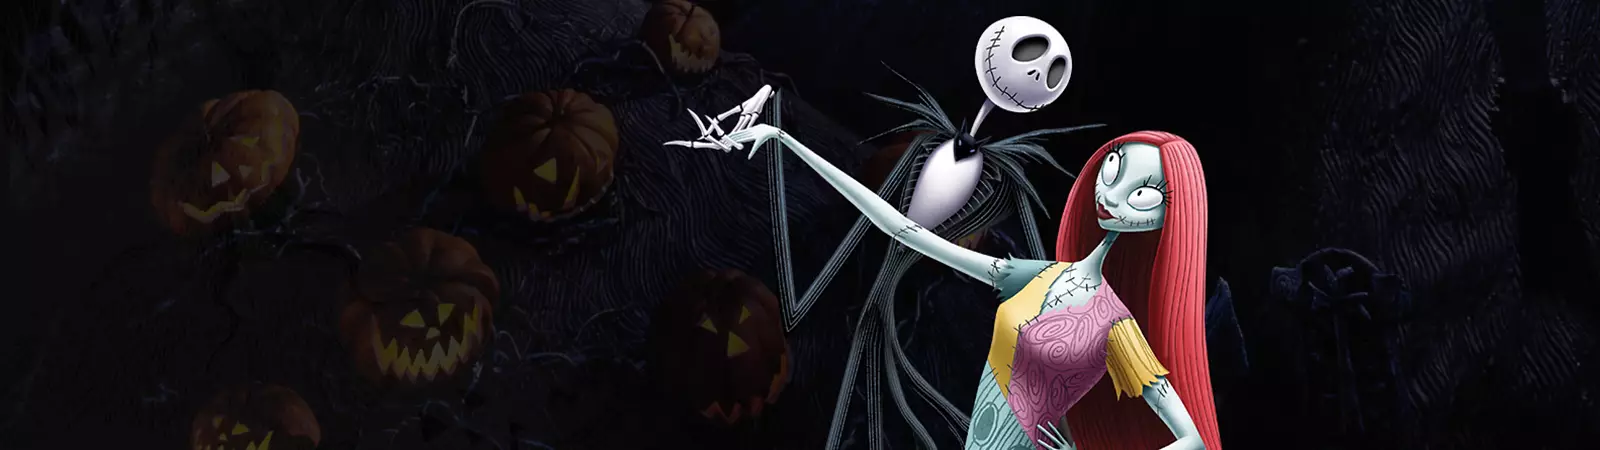 30 Years of Spooky Delights: Paladone’s Best Nightmare Before Christmas Gifts